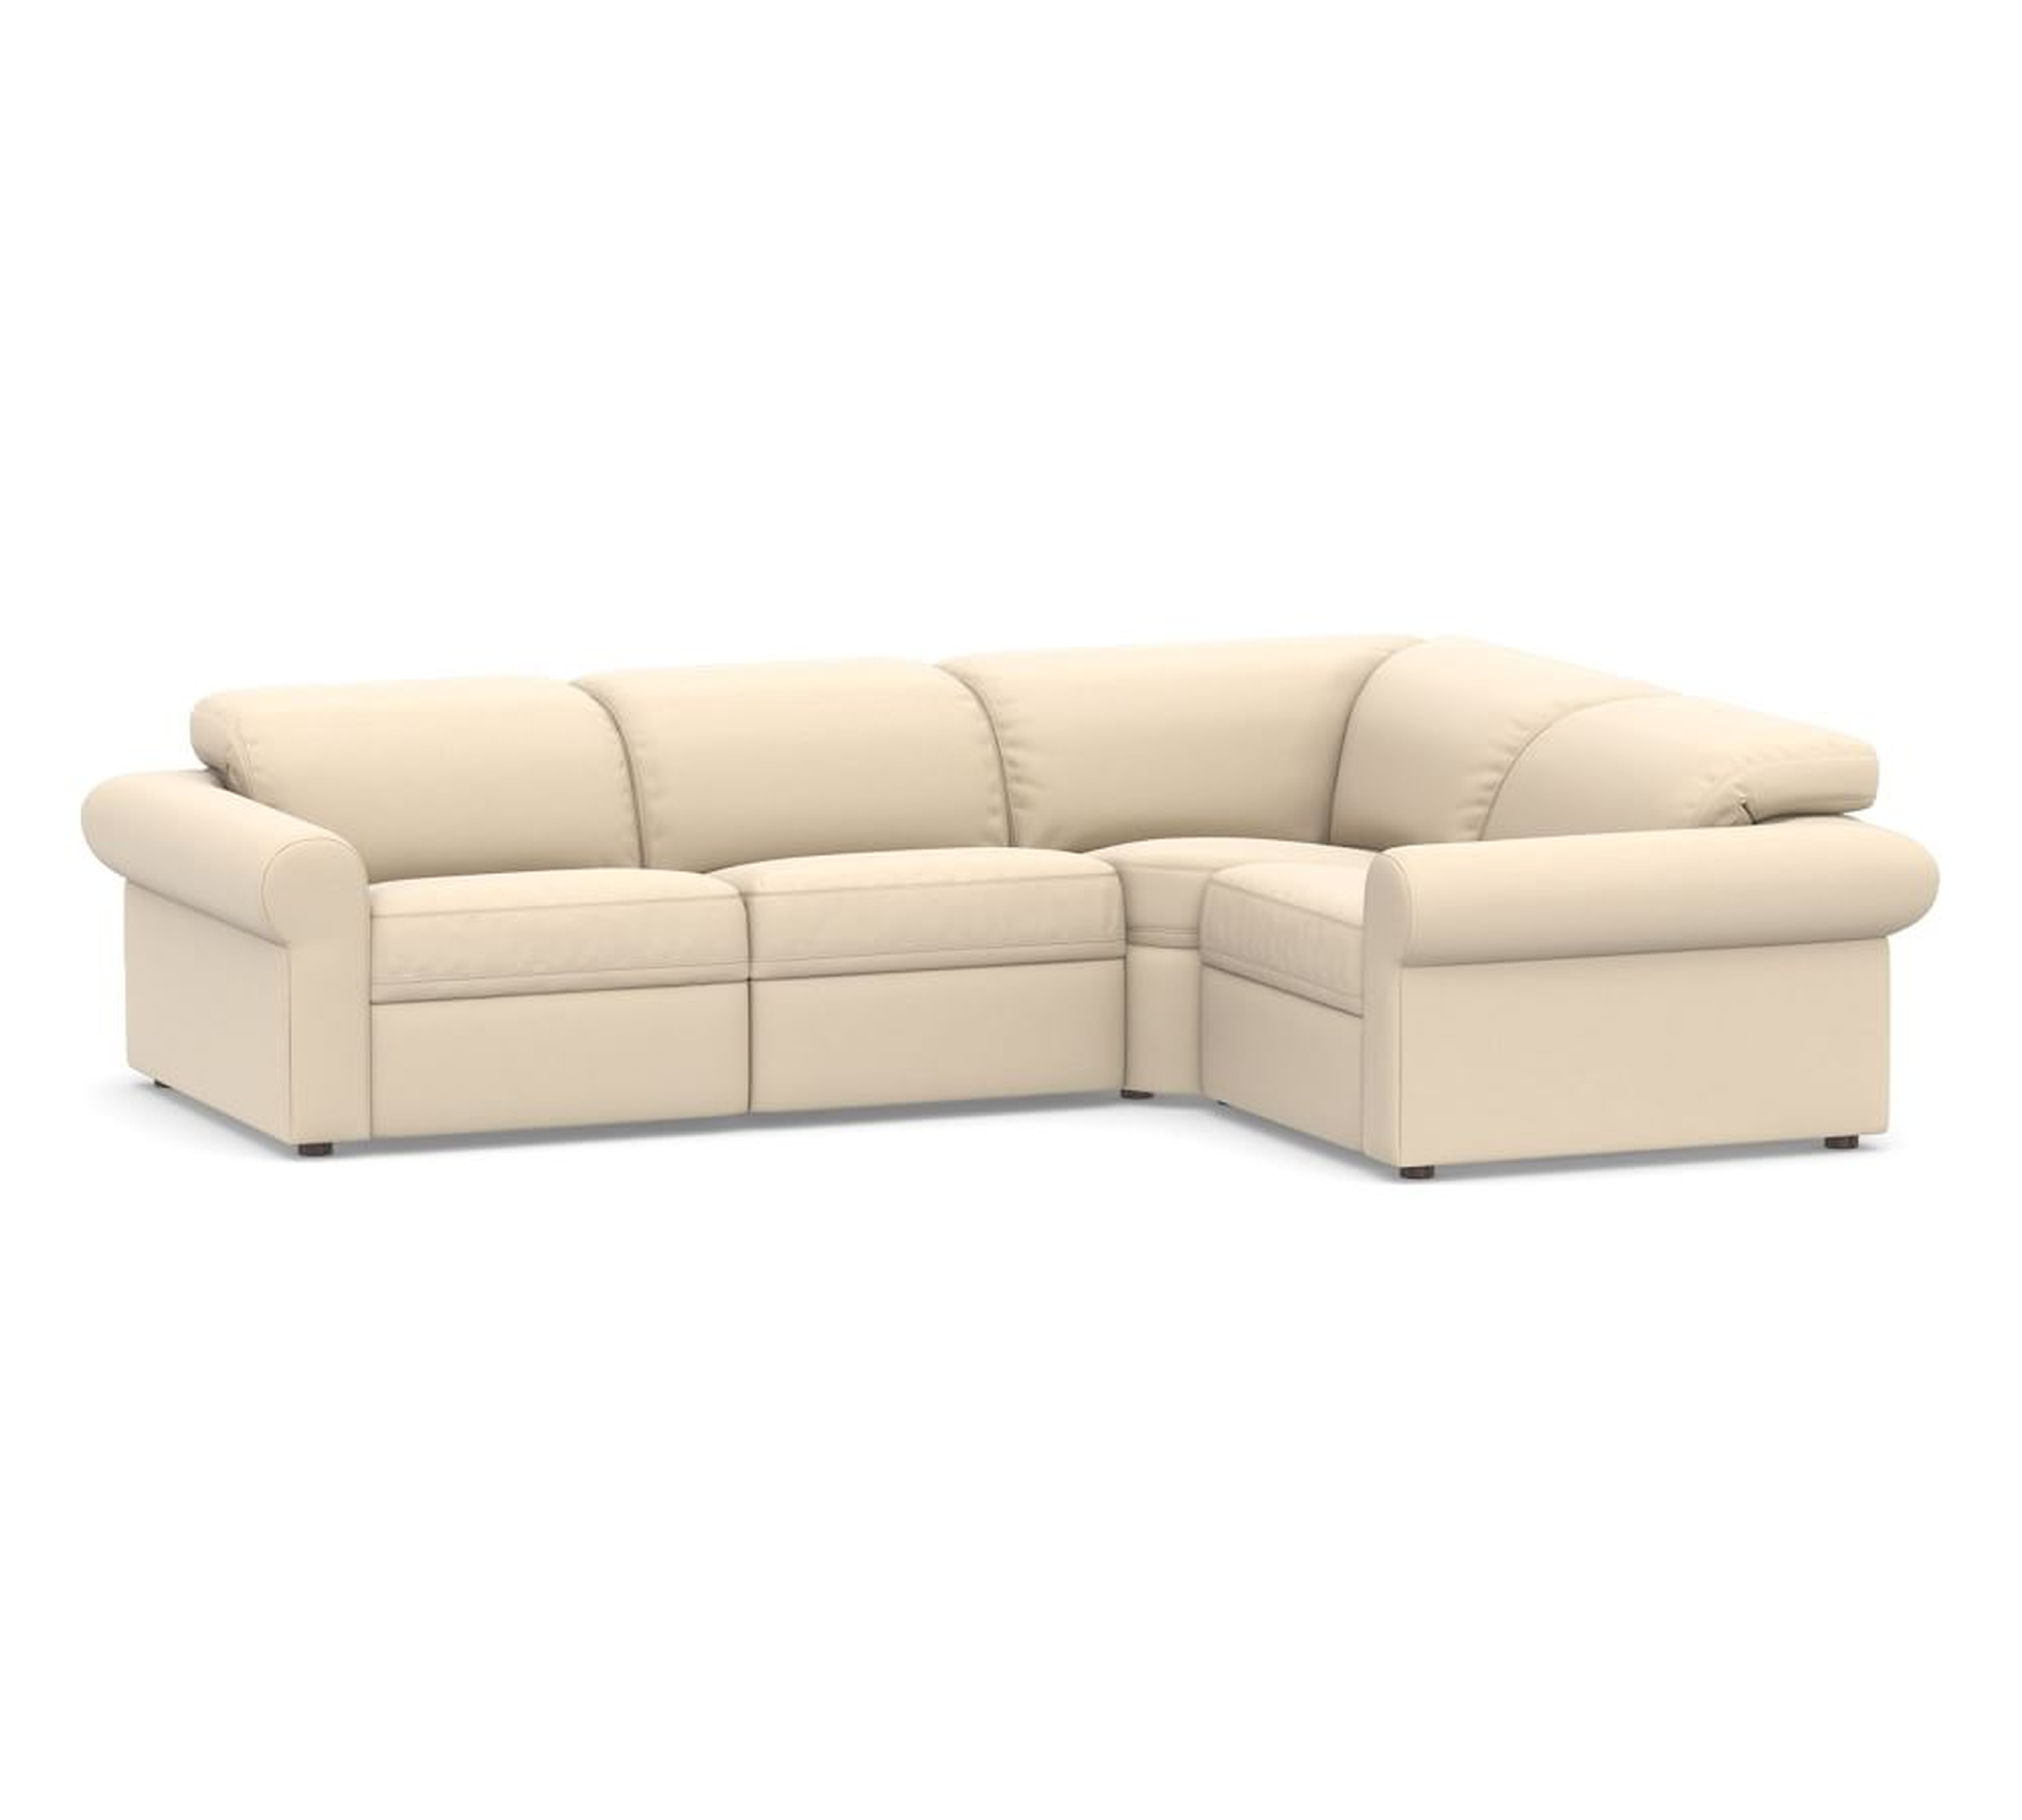 Ultra Lounge Roll Arm Upholstered 4-Piece Reclining Sectional, Polyester Wrapped Cushions, Basketweave Slub Oatmeal - Pottery Barn